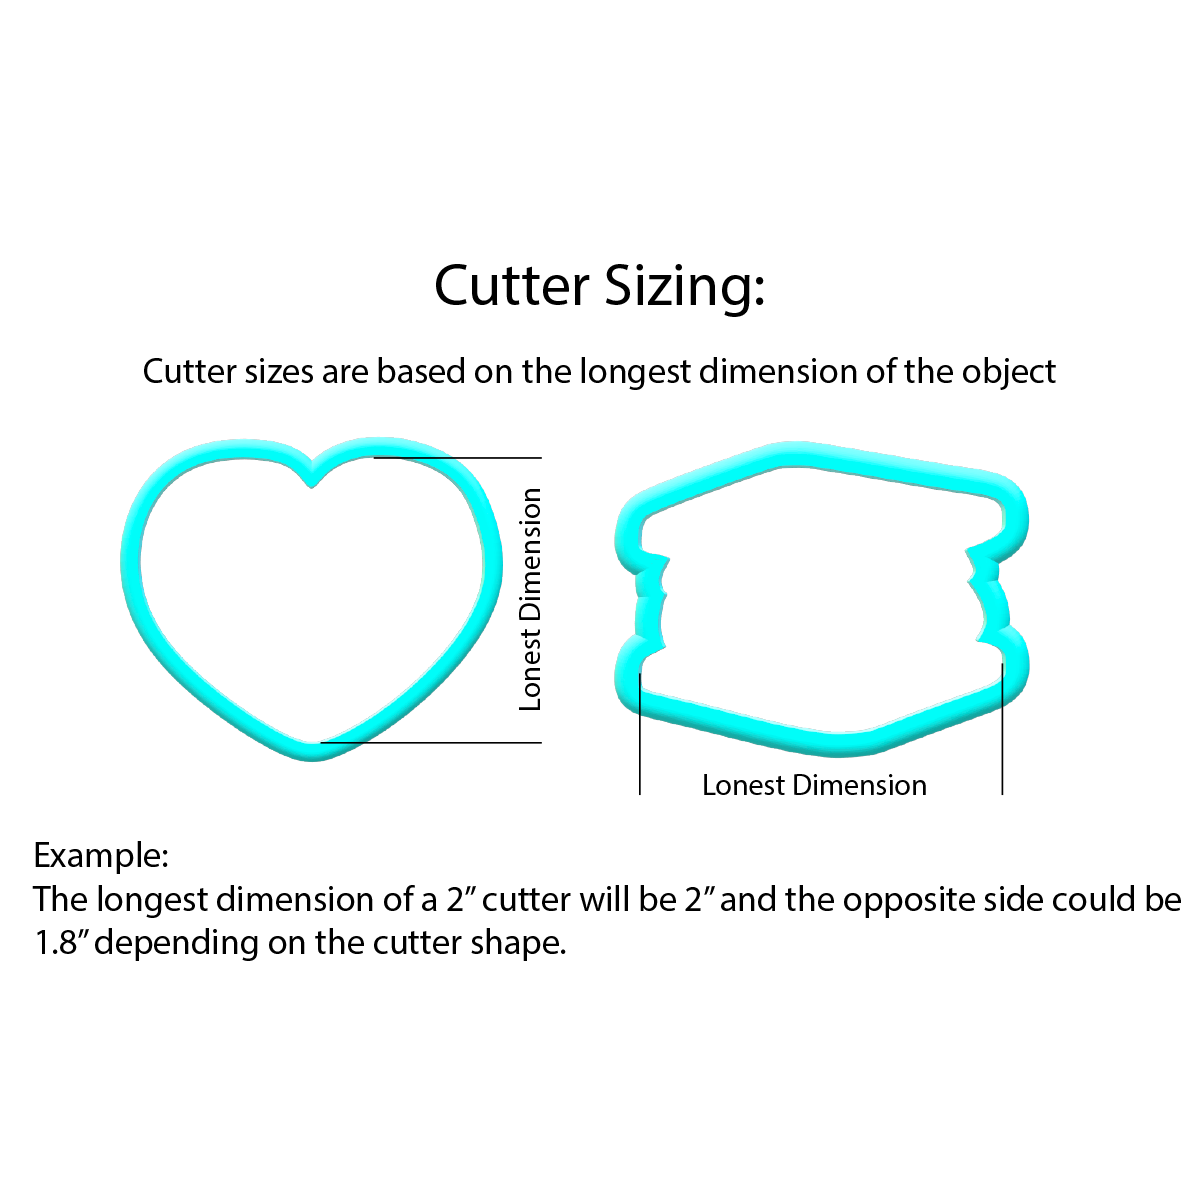 Butterfly Squish Cookie Cutter | STL File